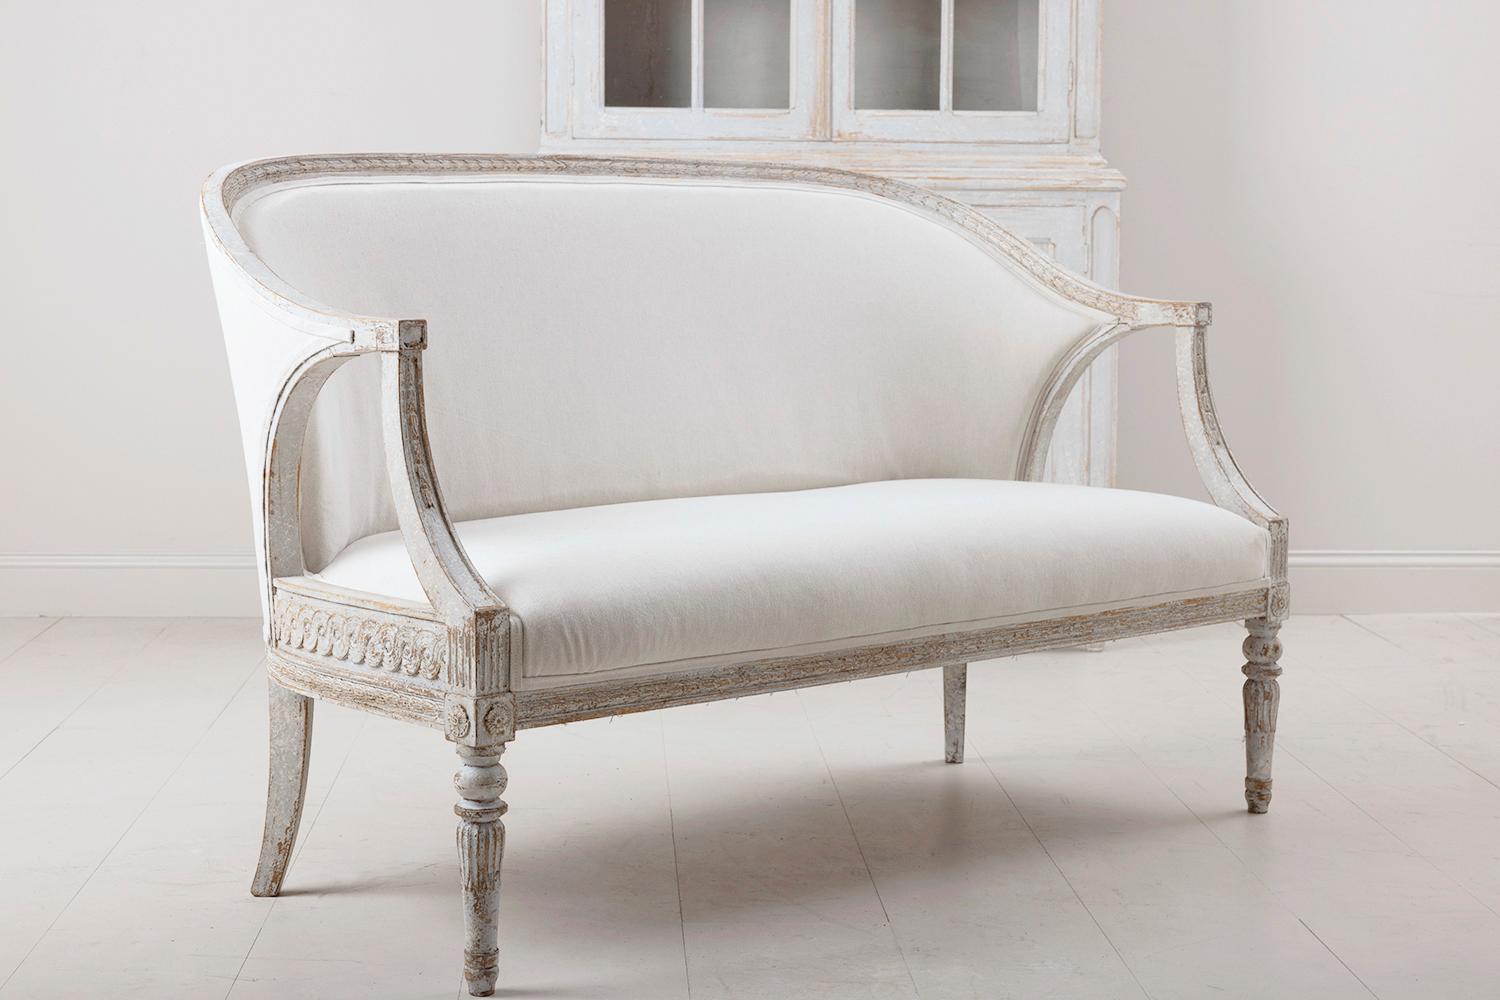 A stunning Swedish sofa in the Gustavian style in original paint with a comfortable barrel-style back, newly upholstered in linen, circa 1900. The frame features carved bell flowers along the front and a carved guilloche pattern on the sides while